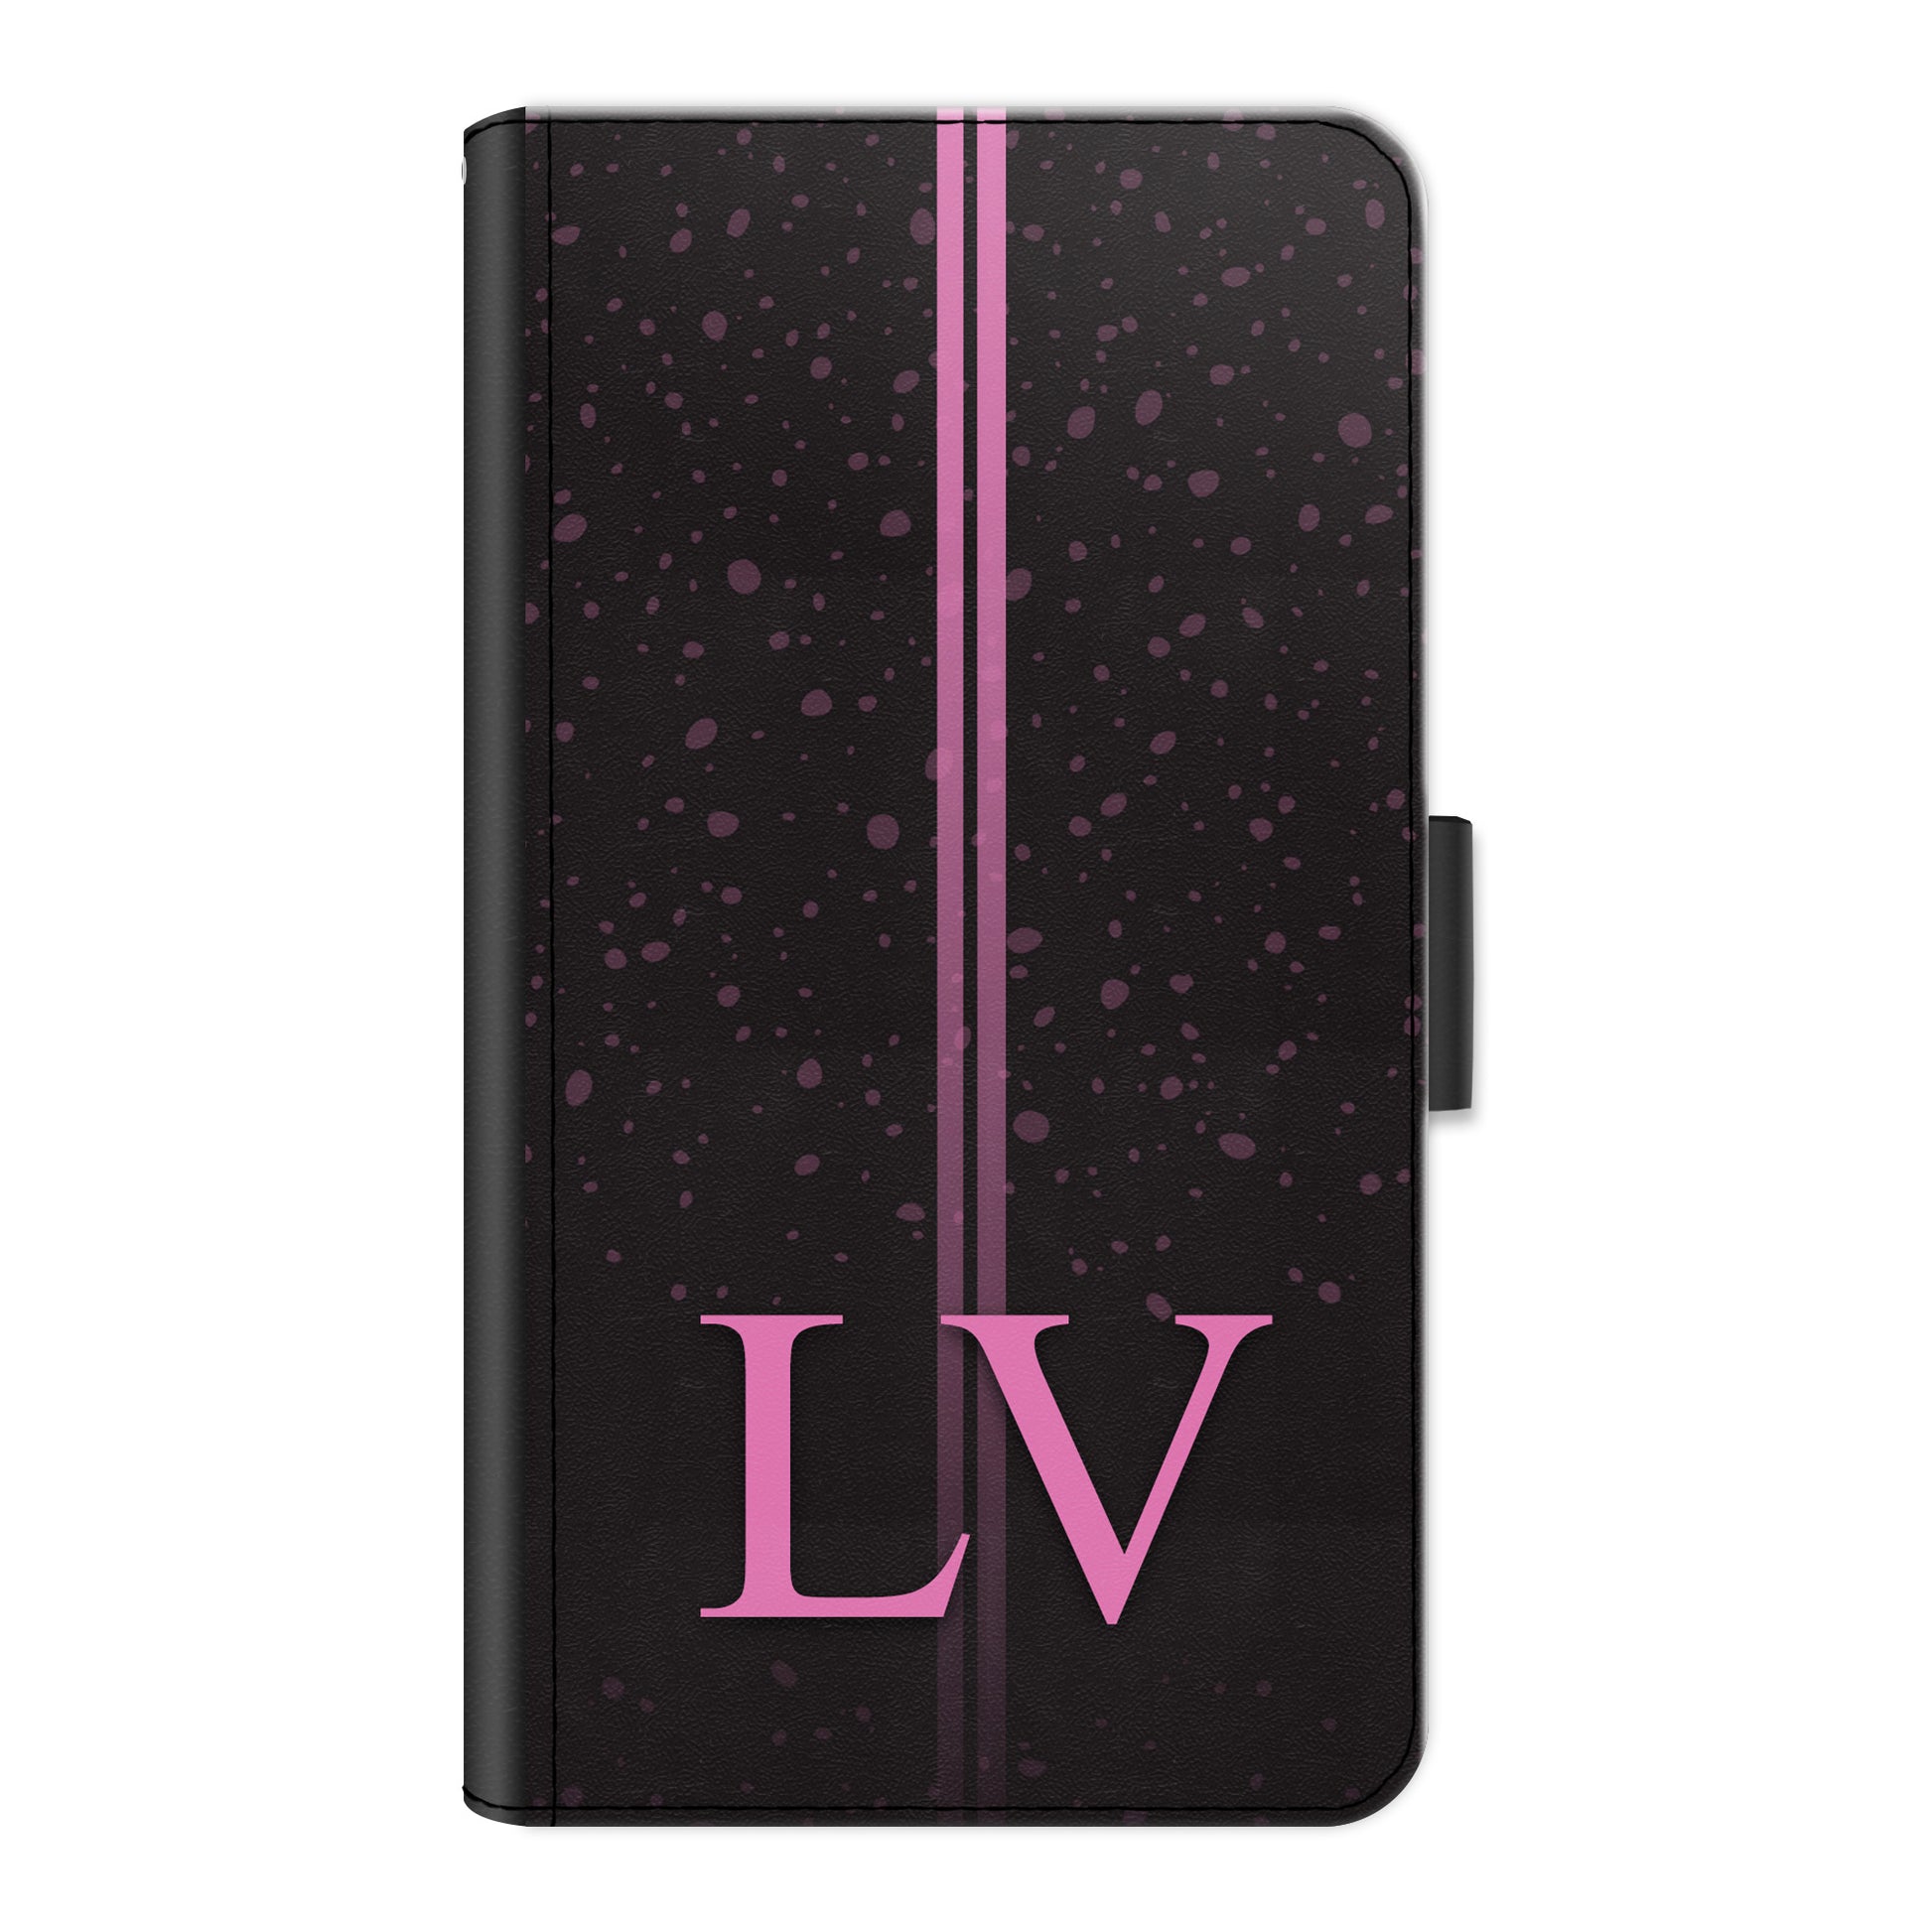 Personalised Xiaomi Phone Leather Wallet with Pink Initials, Pin Stripes and Droplets on Black